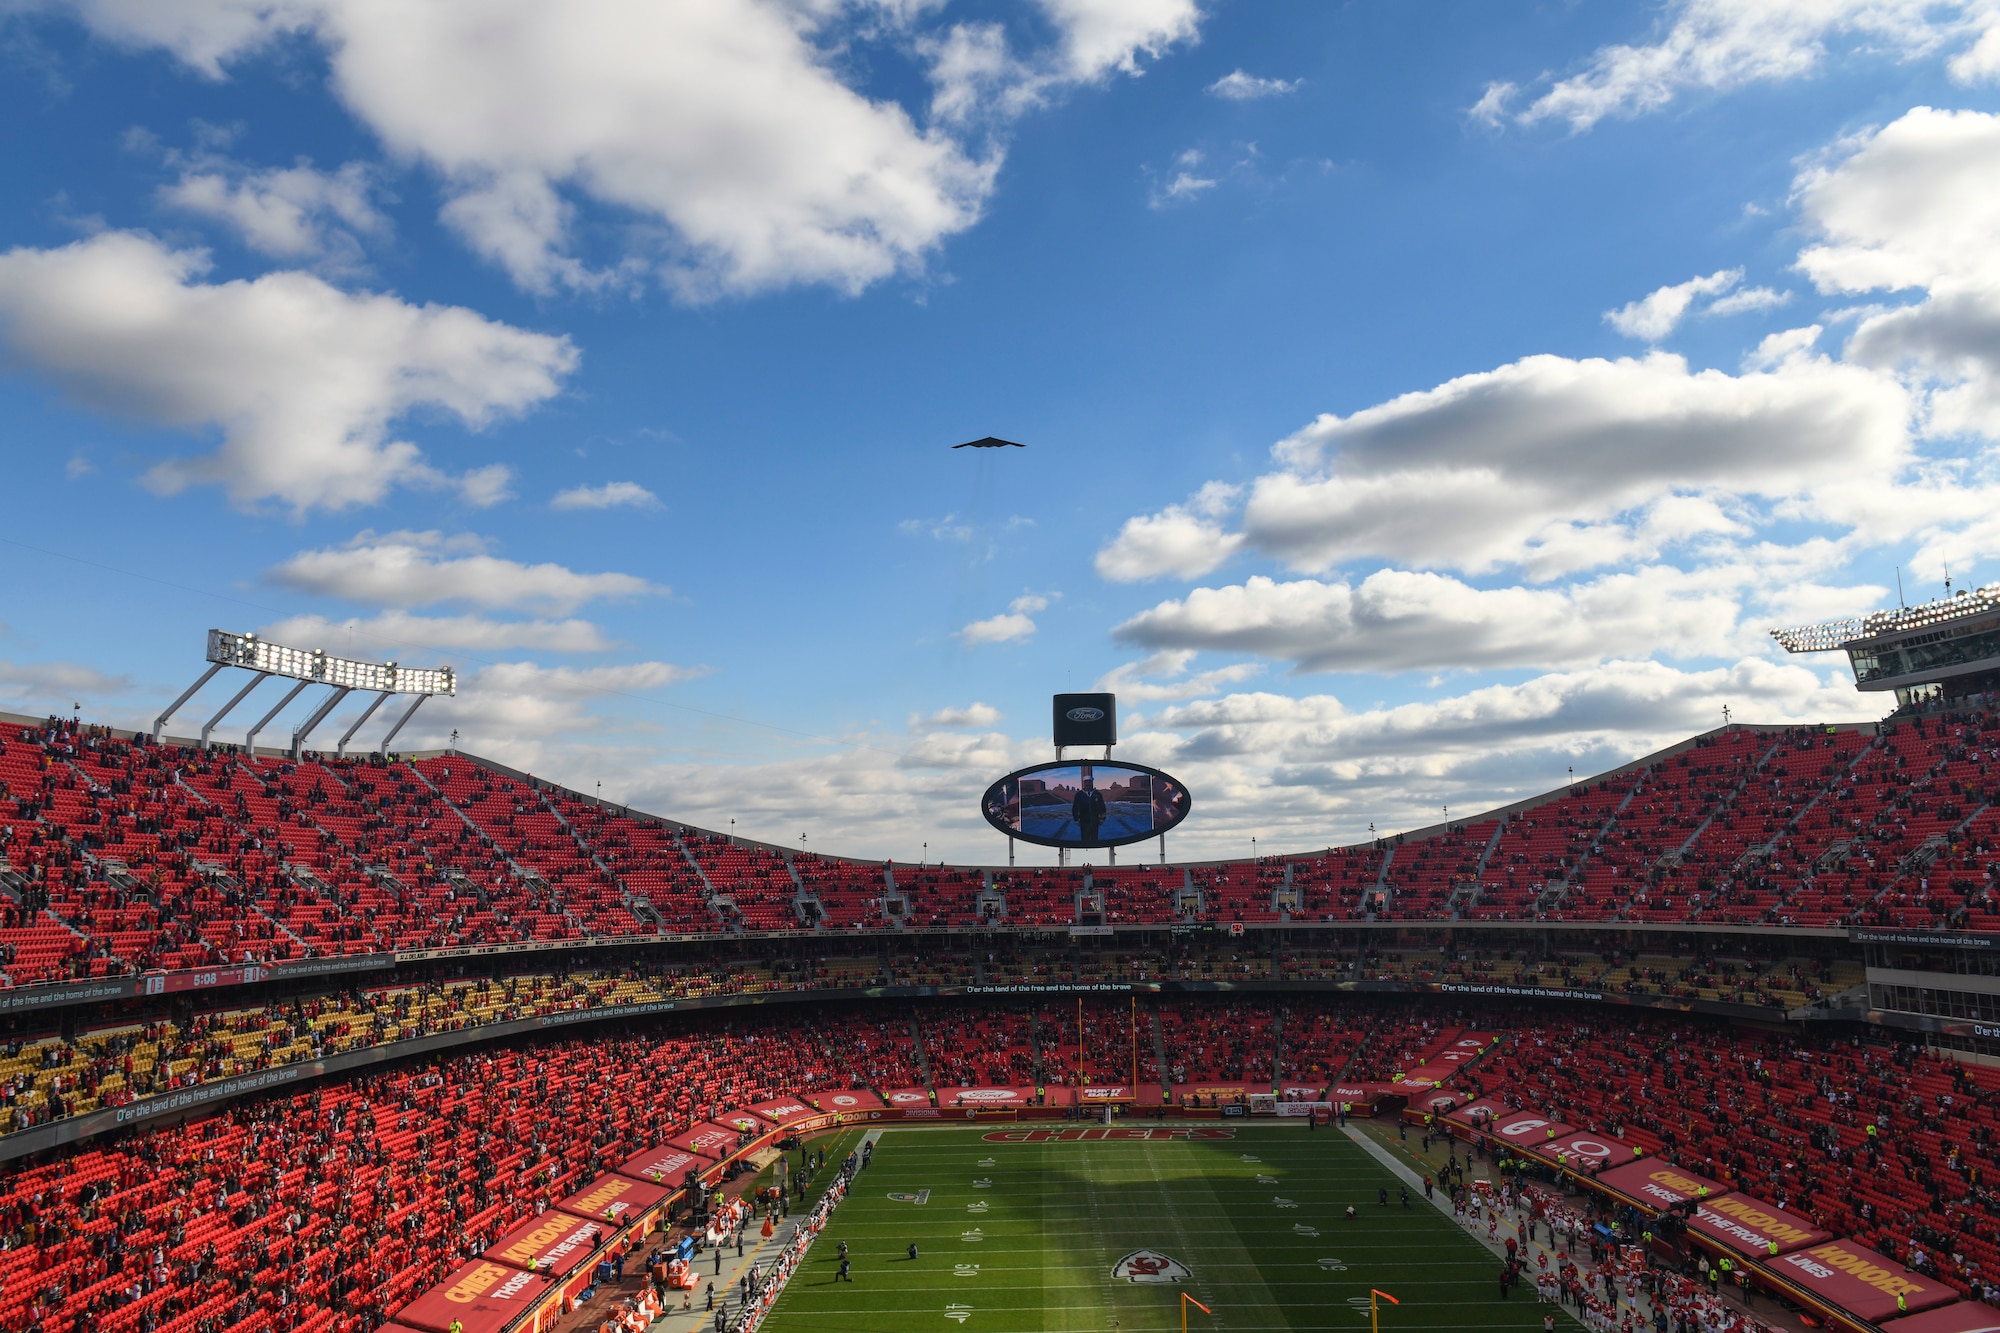 A B-2 Spirit, assigned to Whiteman Air Force Base, performs a flyover at Arrowhead Stadium during the National Anthem prior to the start of the AFC Divisional Playoffs at Arrowhead Stadium, Kansas City, Missouri, Jan. 17, 2021. The B-2 crews perform flyovers as part of regularly scheduled training flights to support community functions and government events. (U.S. Air Force photo by Tech. Sgt. Heather Salazar)